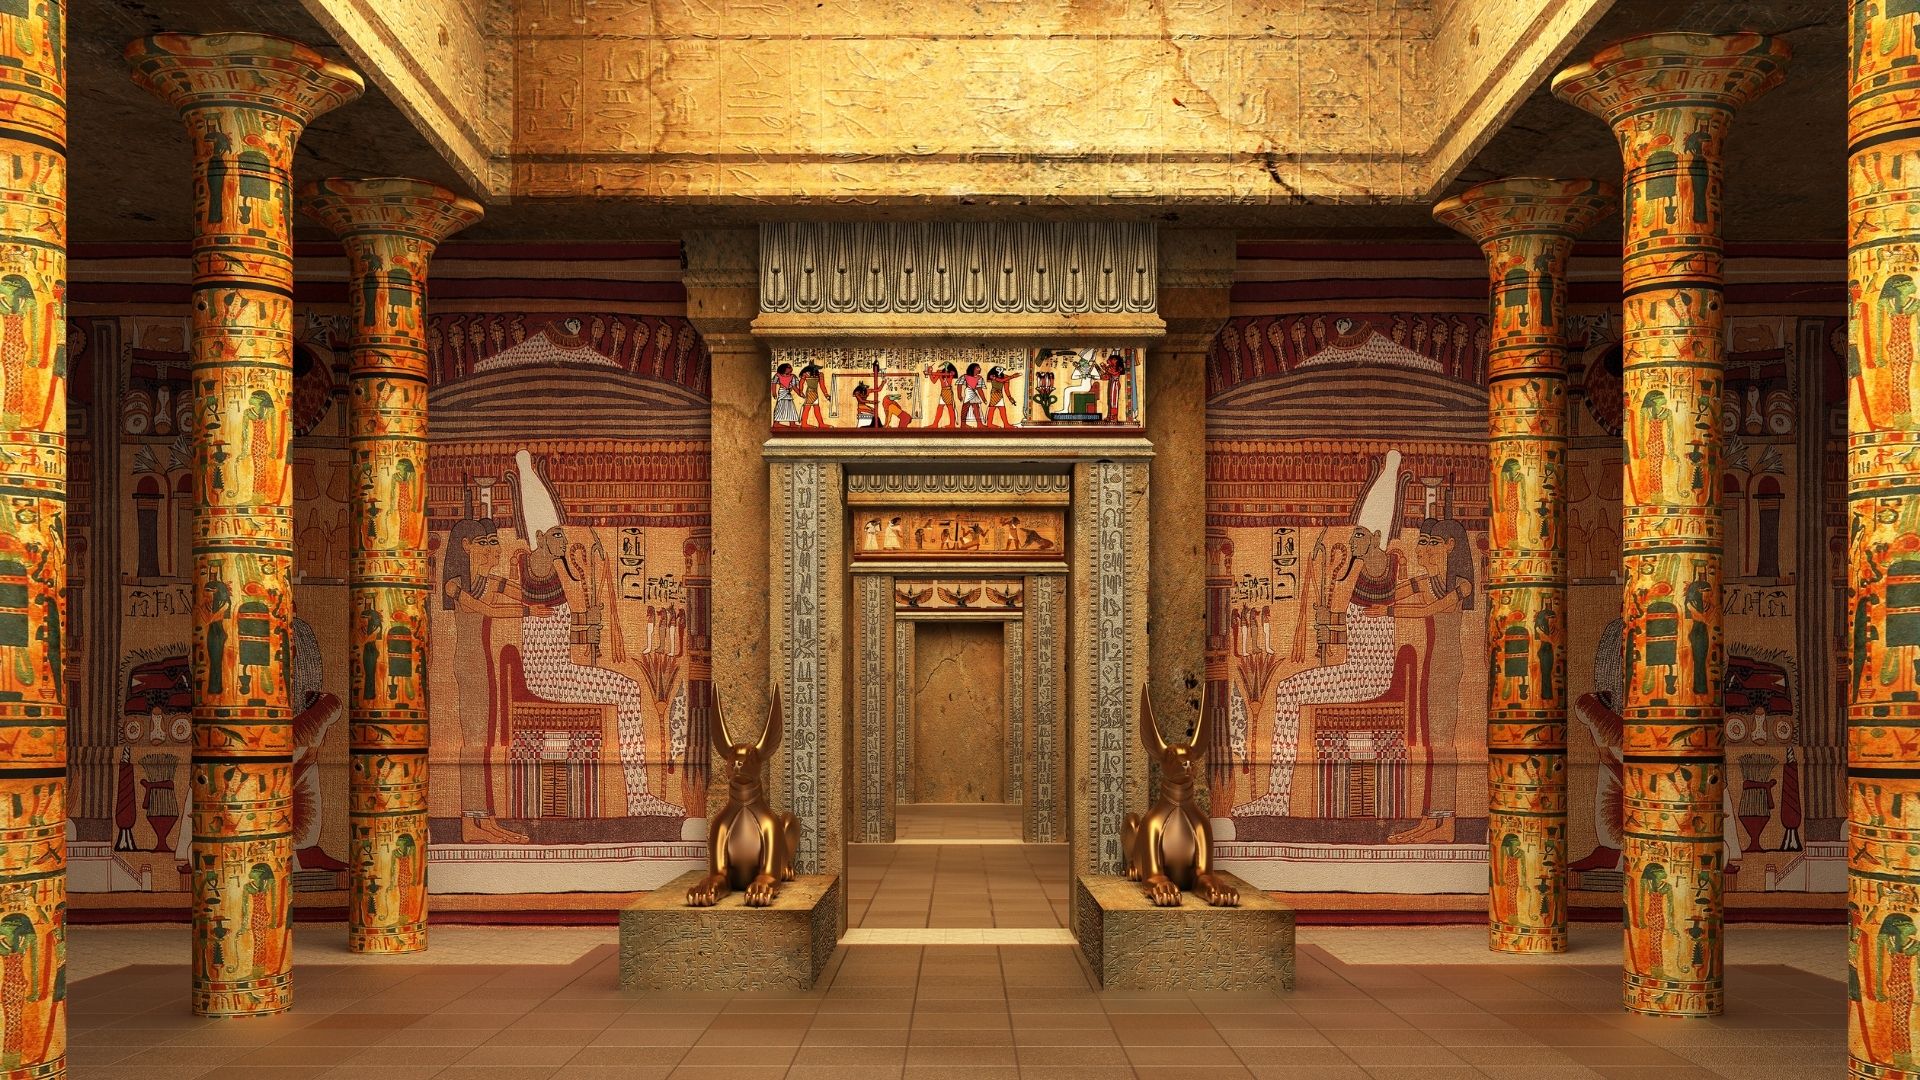 Combining the real-world mechanics of escape rooms, puzzles, and popular problem-solving challenges into a 100% digital environment, Murder in Ancient Egypt is a polished and fined tuned experience great for entire teams to get in on.